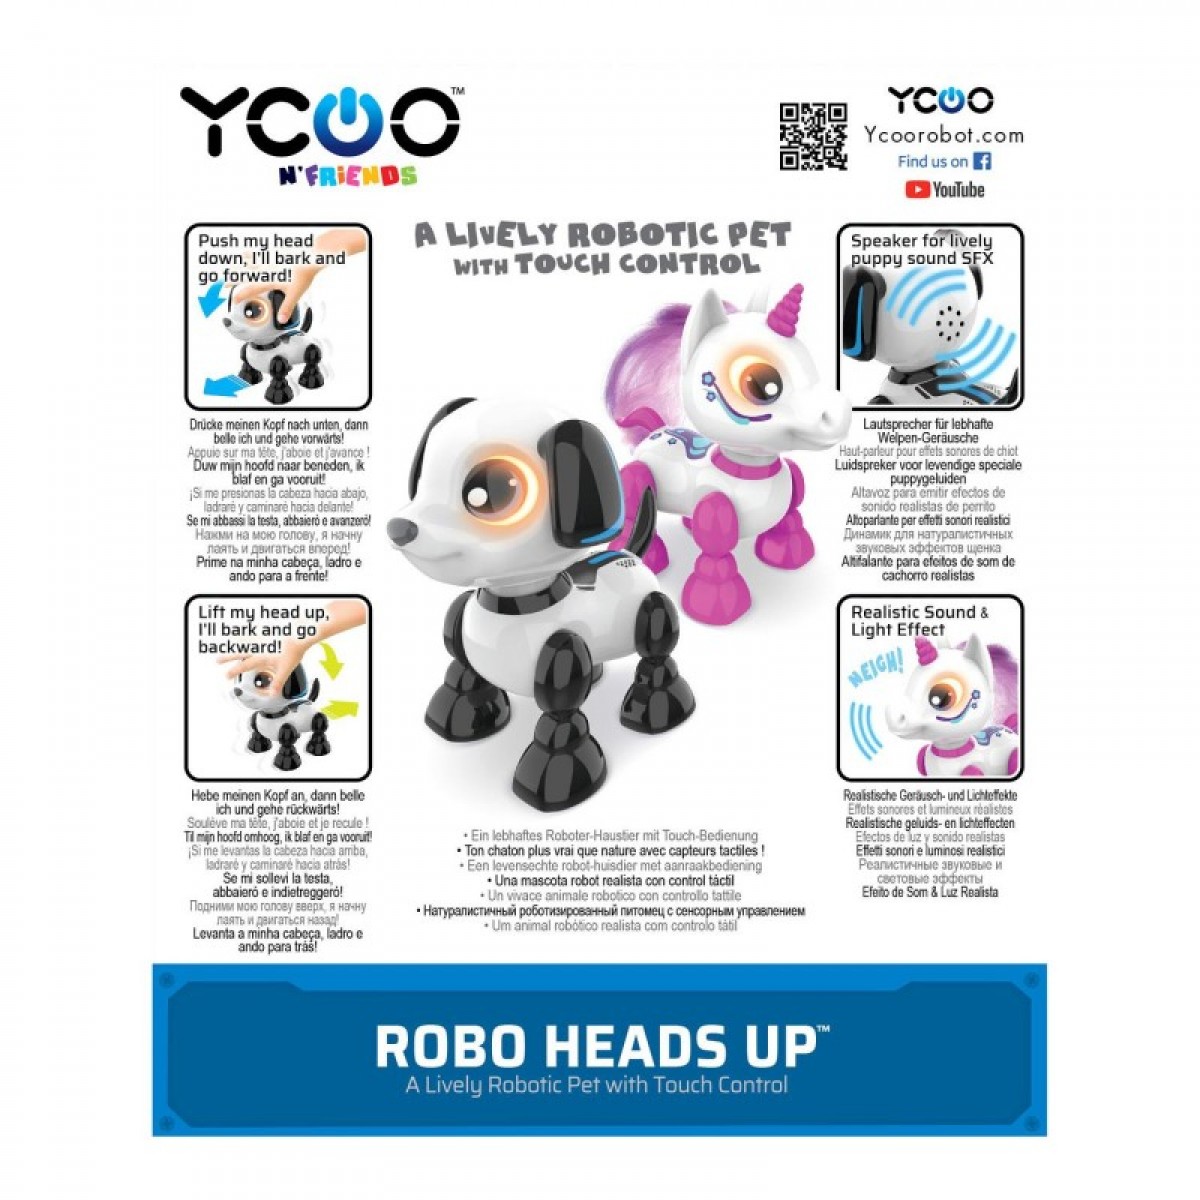 Silverlit Robo Heads Up for Kids age 3Y+